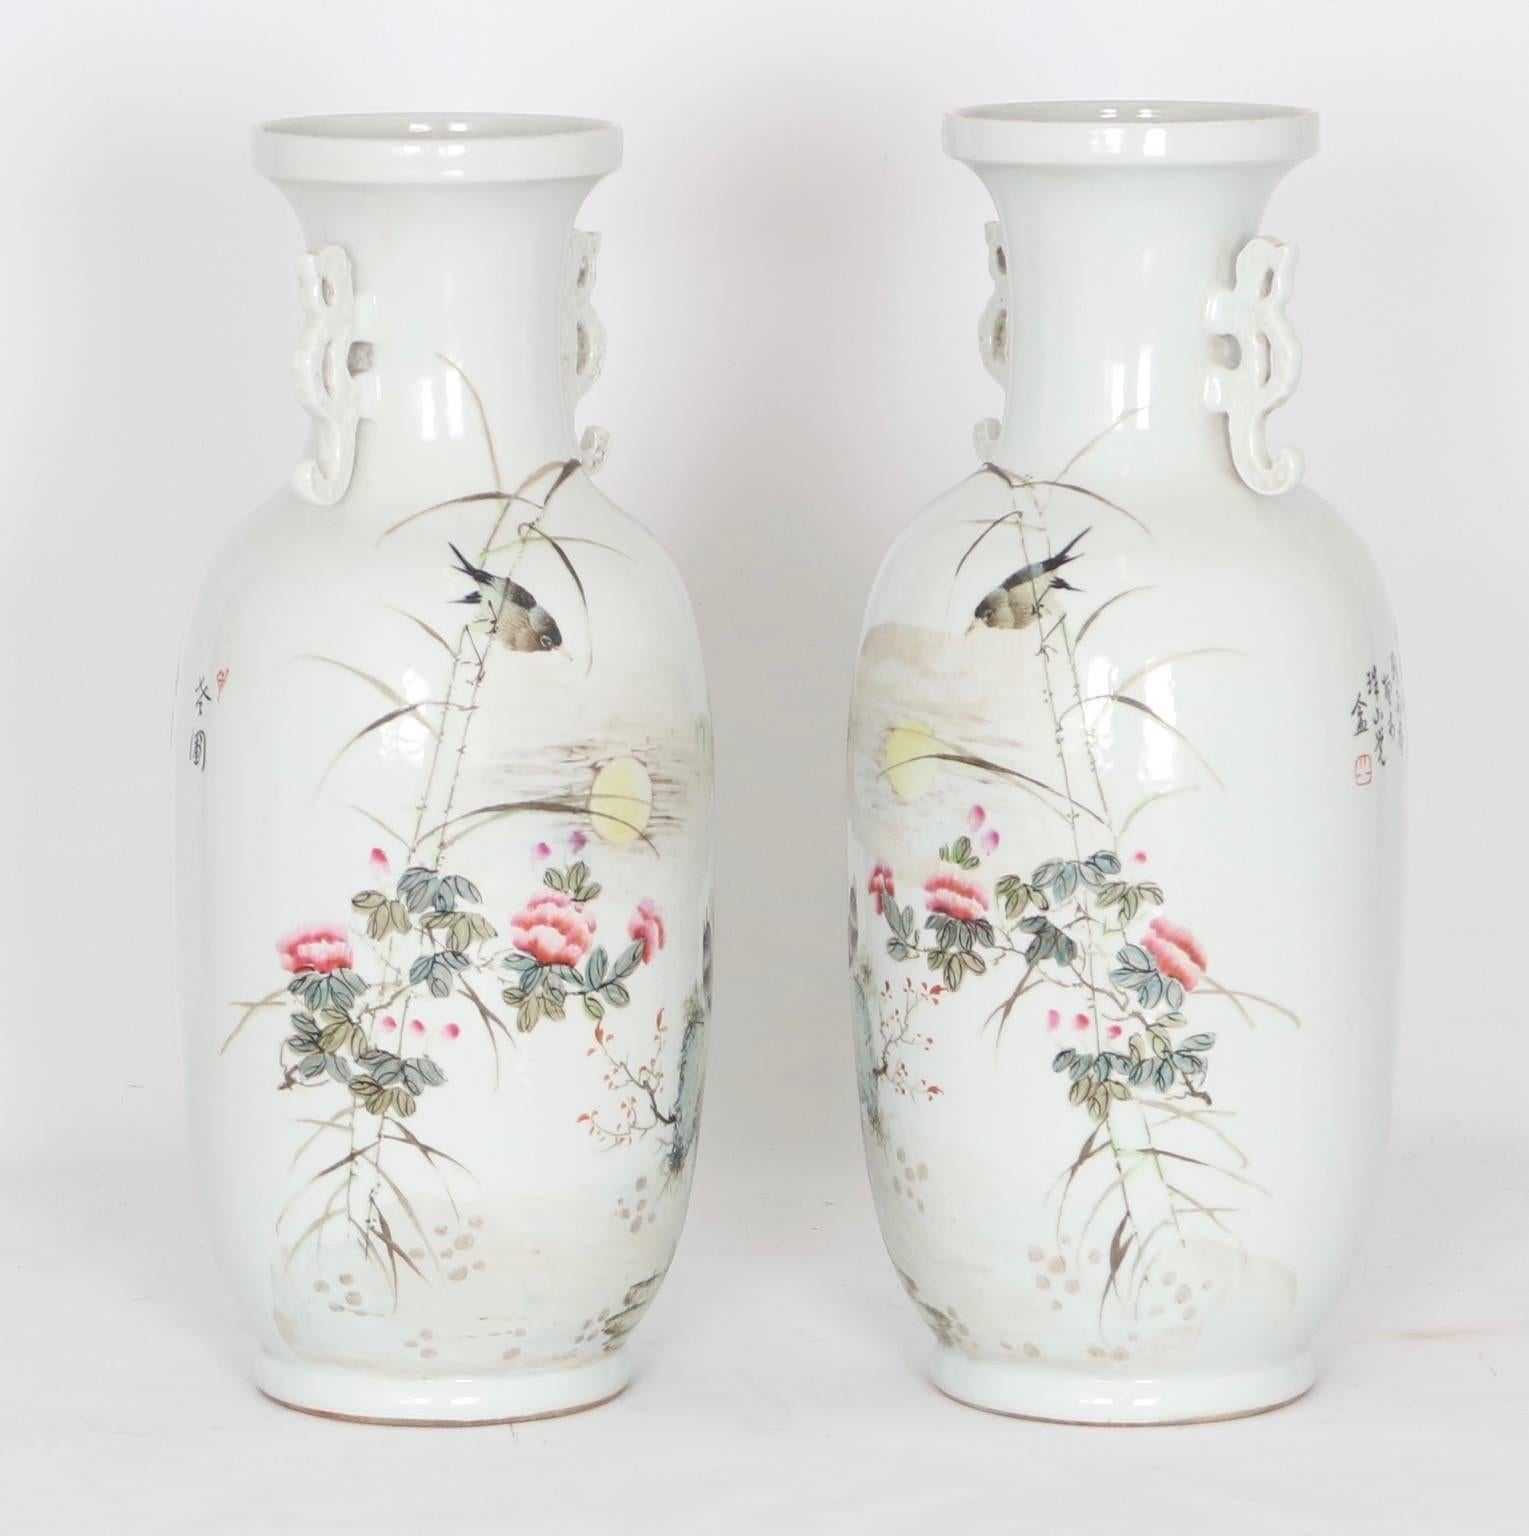 Chinese vases with enamel illustrations. Features miniature landscapes with birds, flowers and calligraphy against a glossy white background. Includes small decorative handles on each. Wear appropriate to age and use. The pair are in excellent